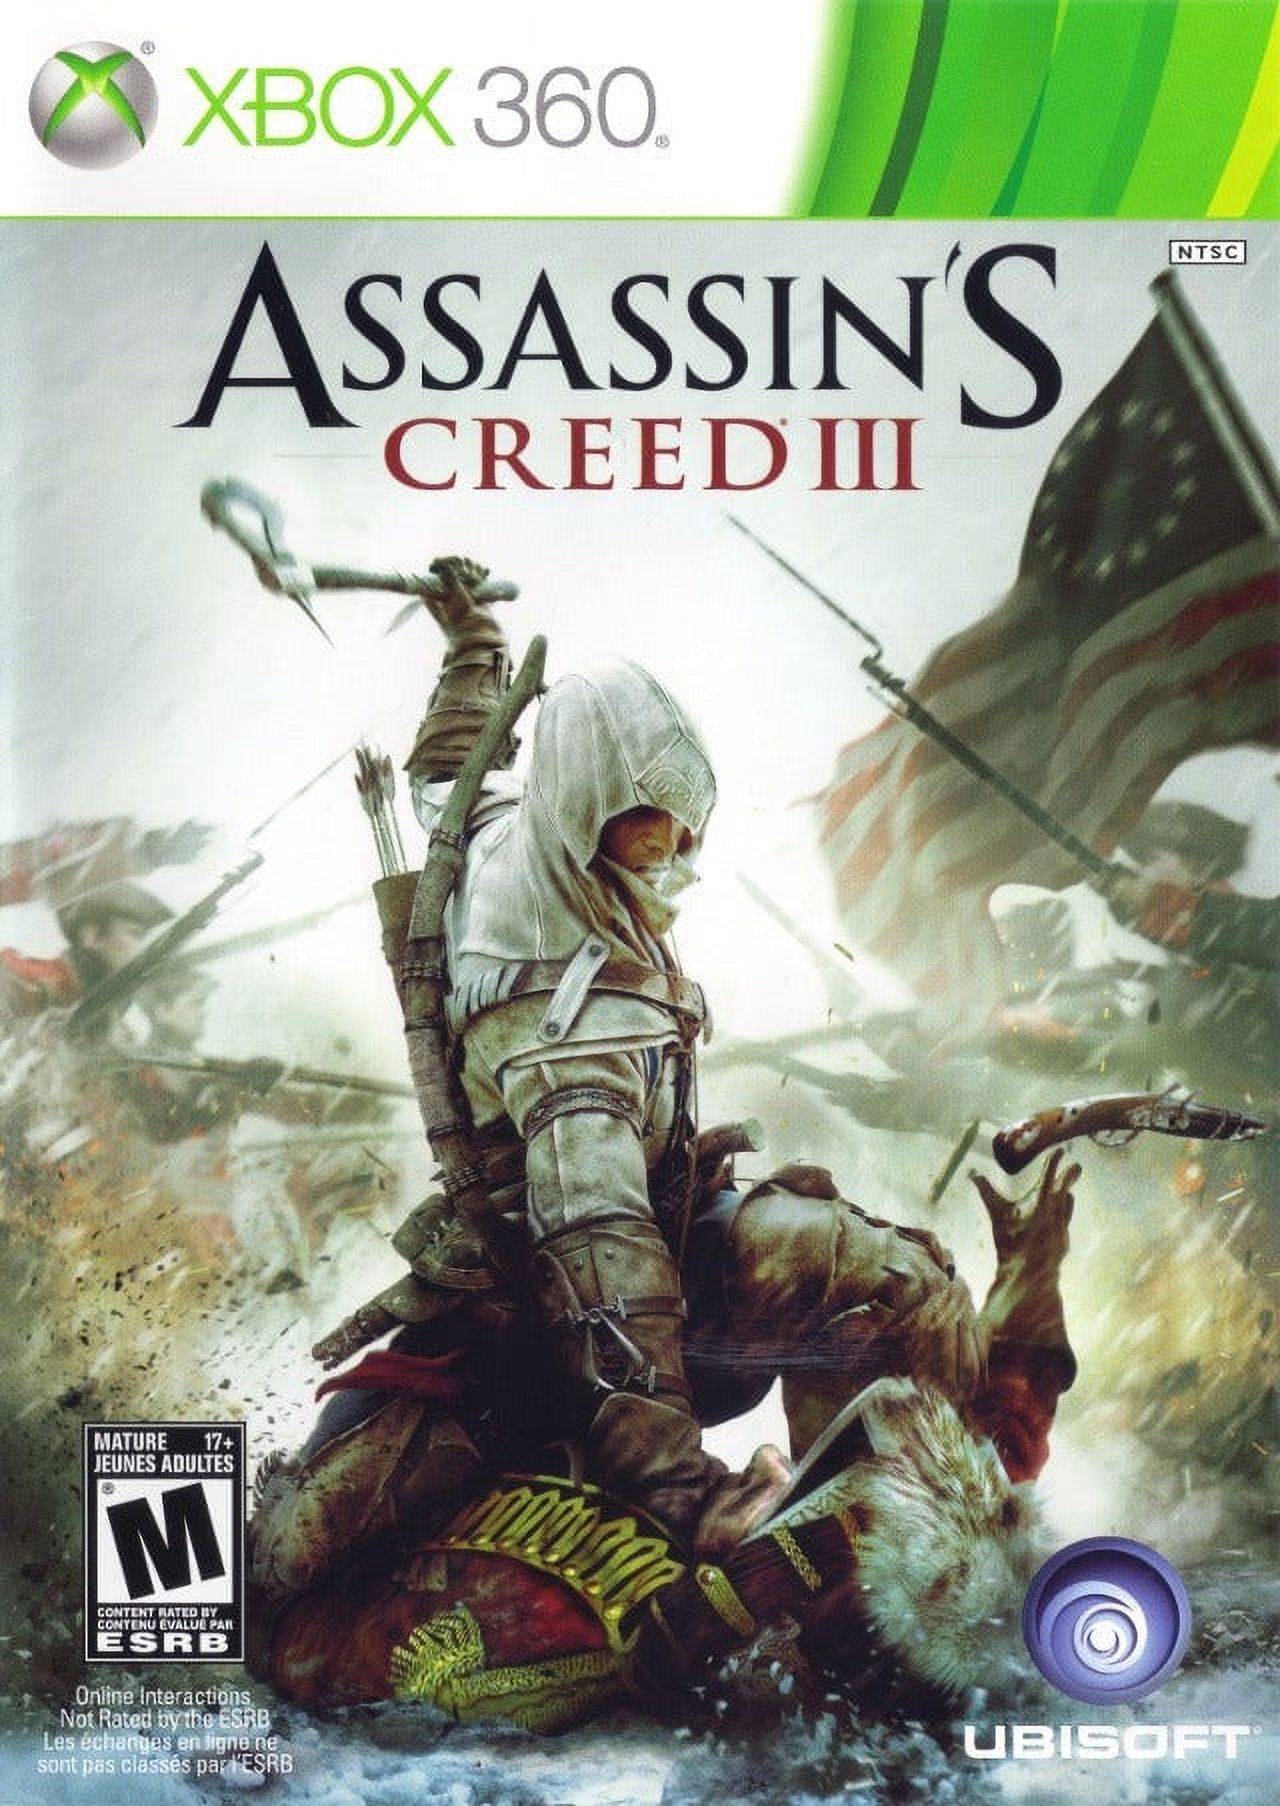 Assassin's Creed 3 (XBOX 360) - image 1 of 2